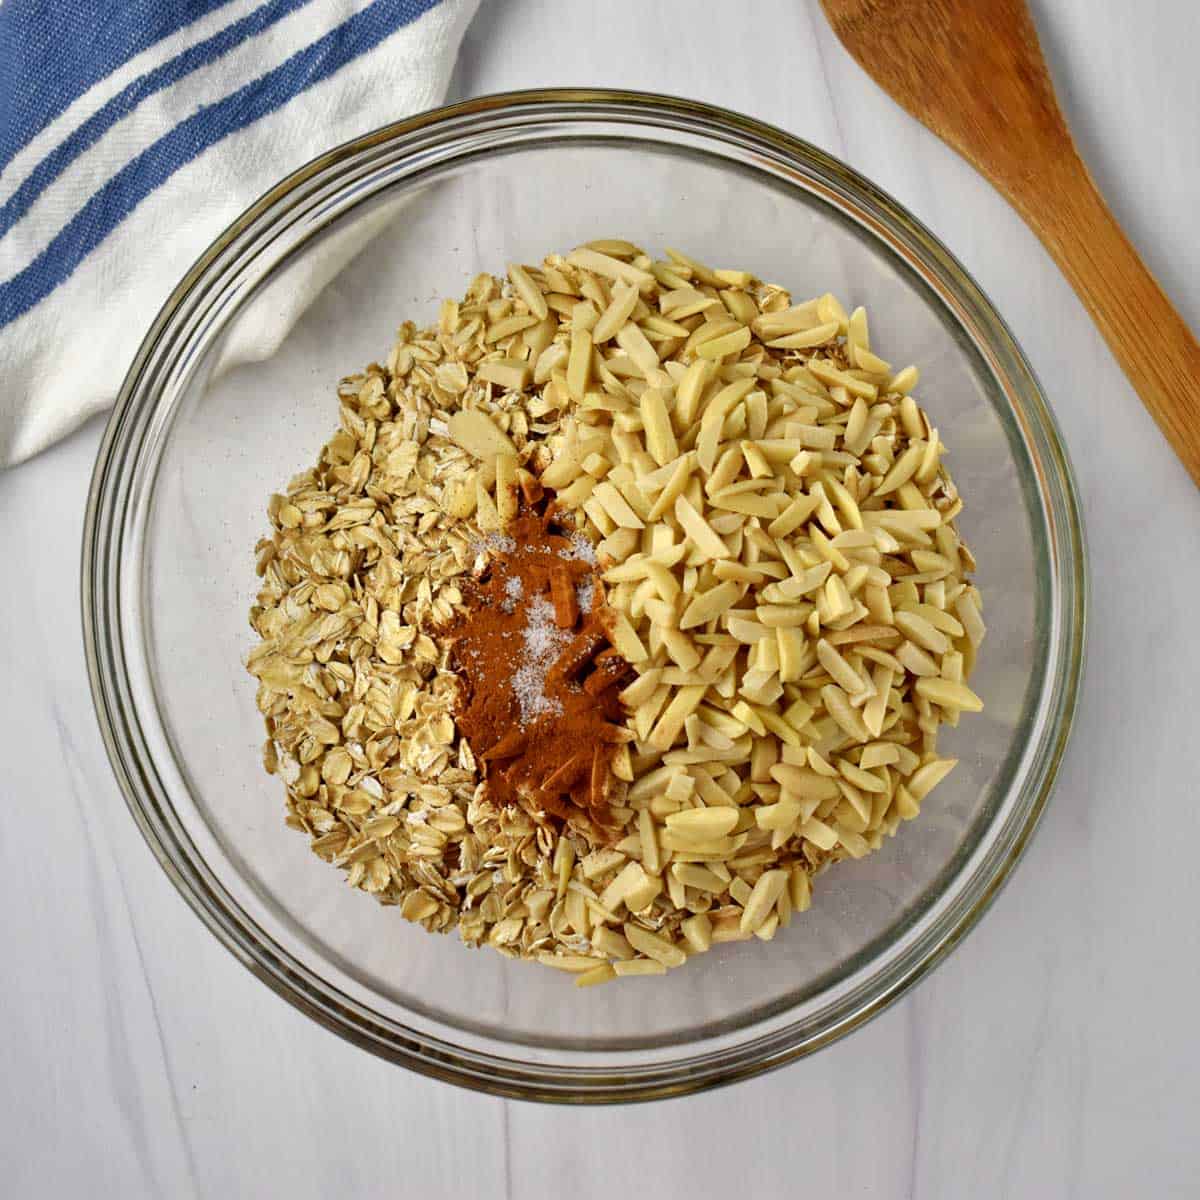 Gluten free oats, slivered almonds, cinnamon, and salt in glass mixing bowl.